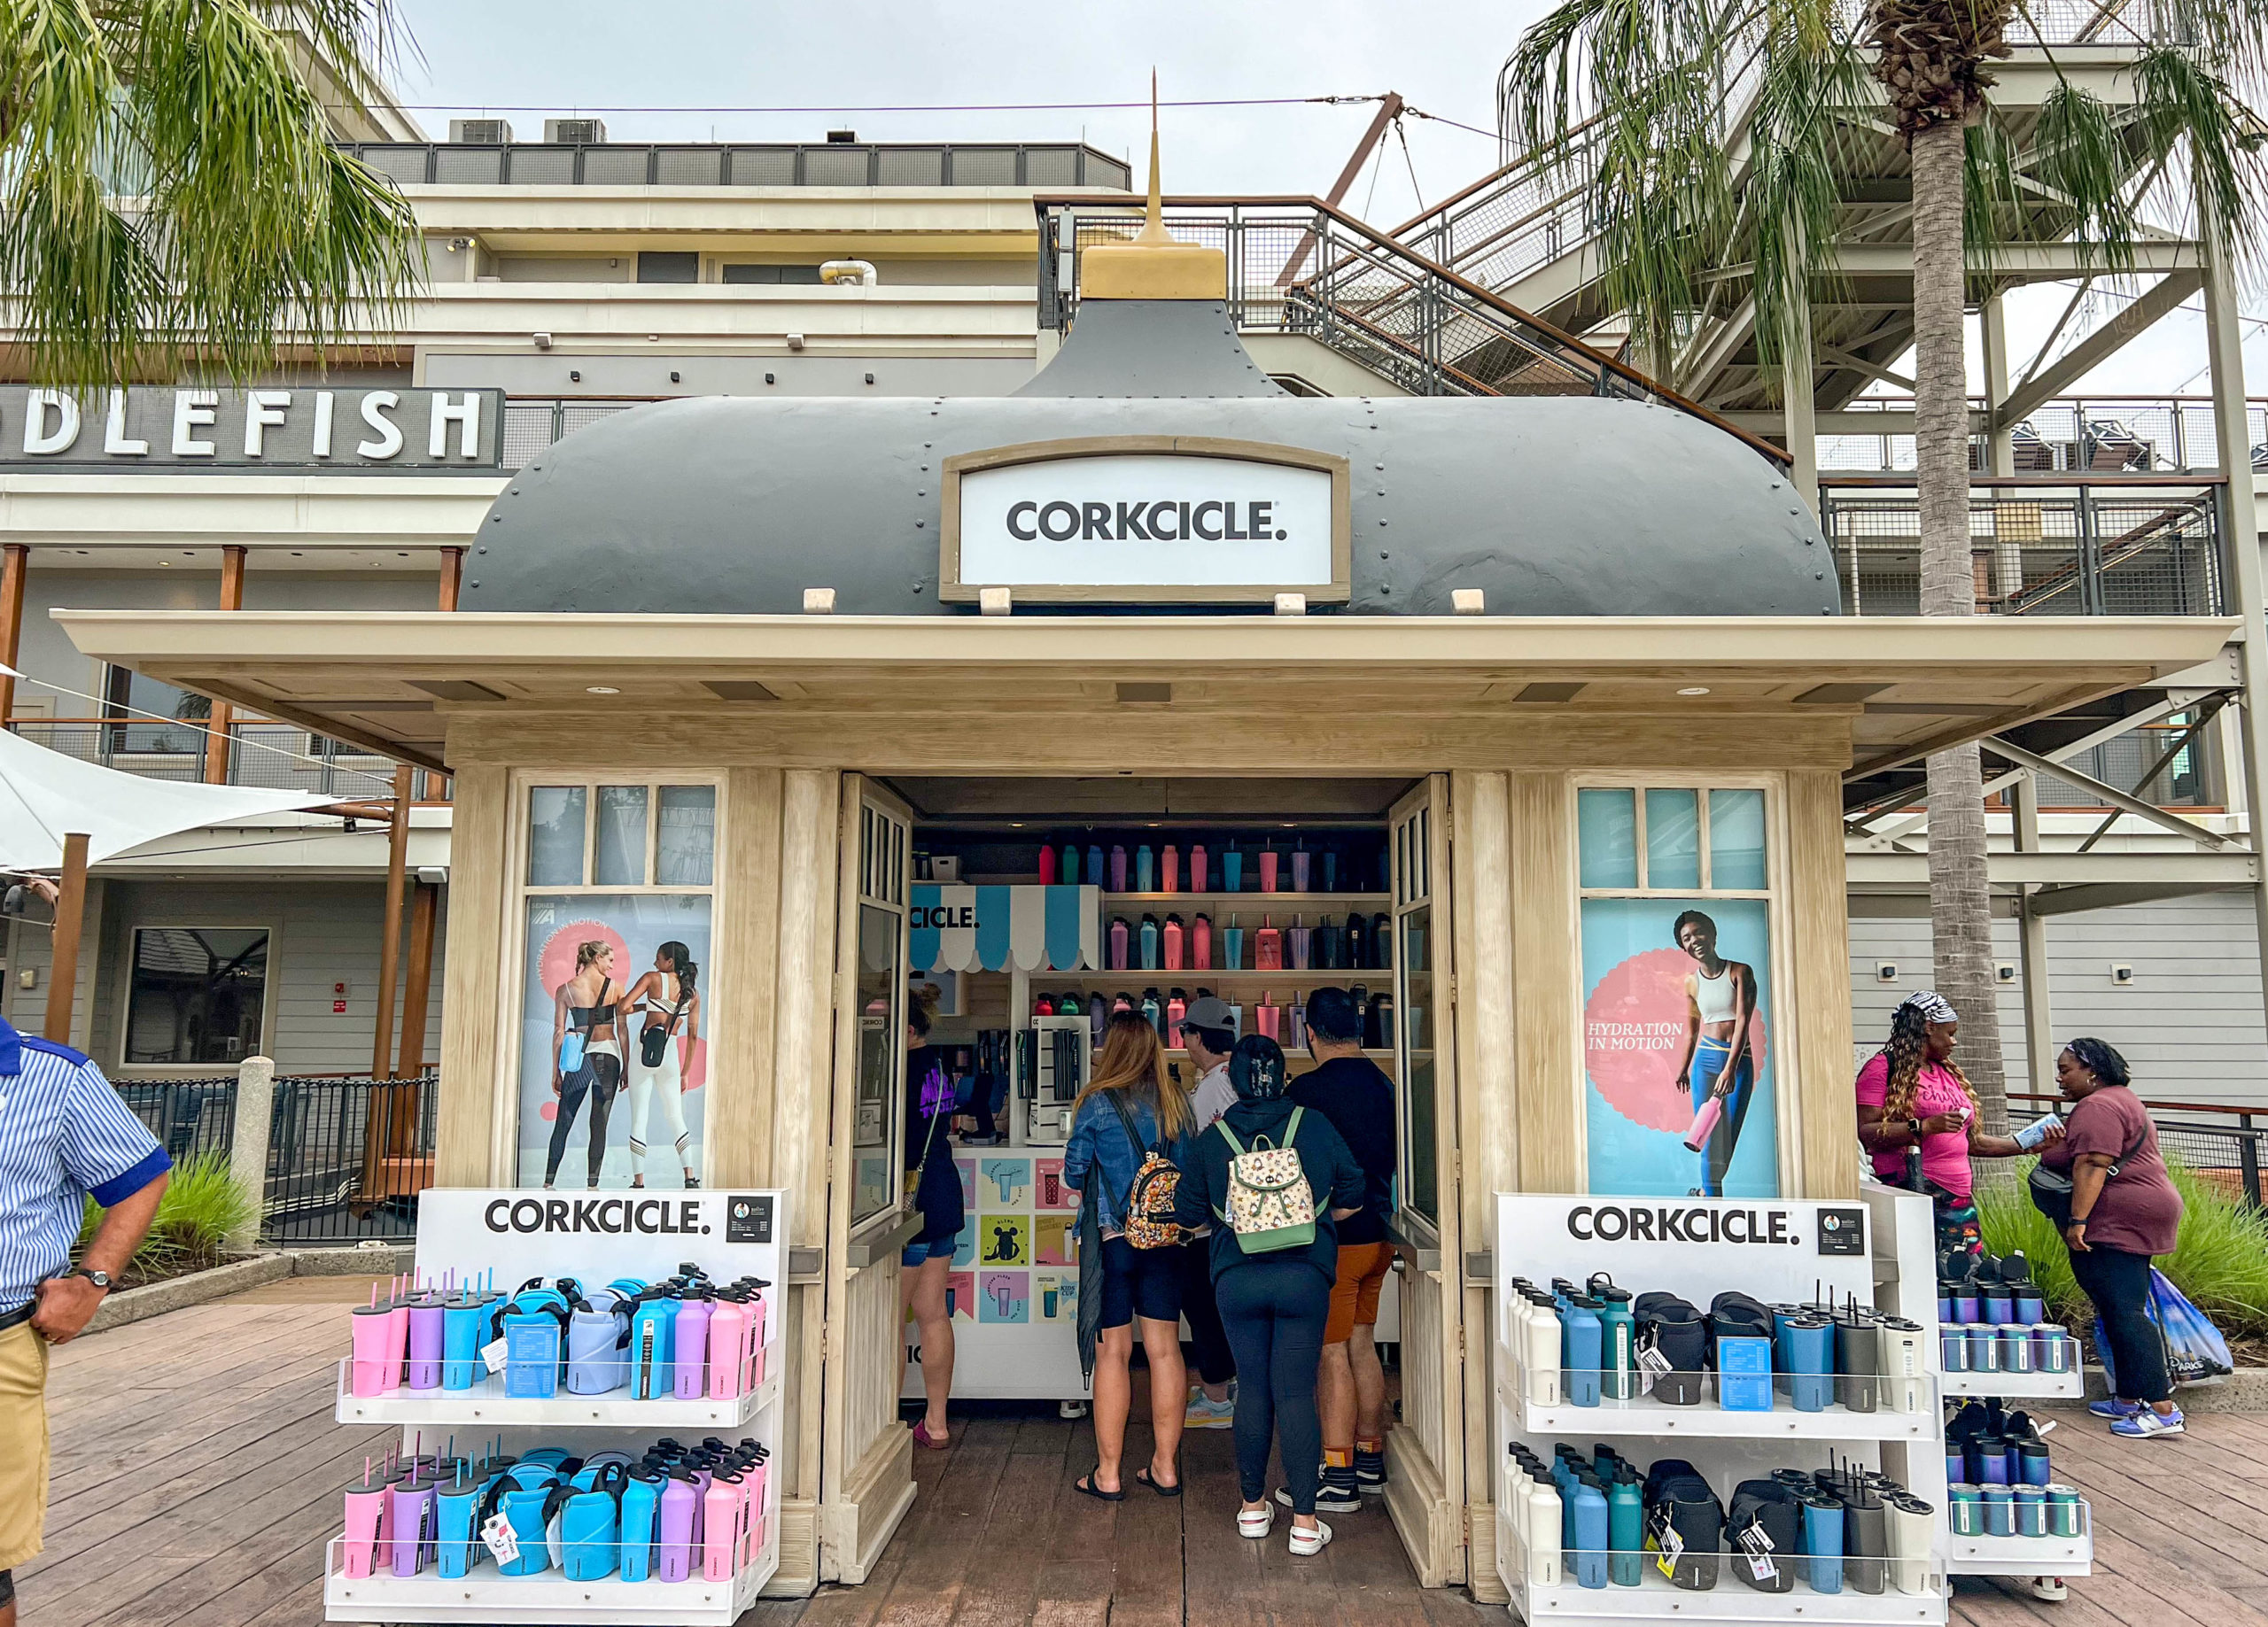 Corkcicle opens new shop at Disney Springs